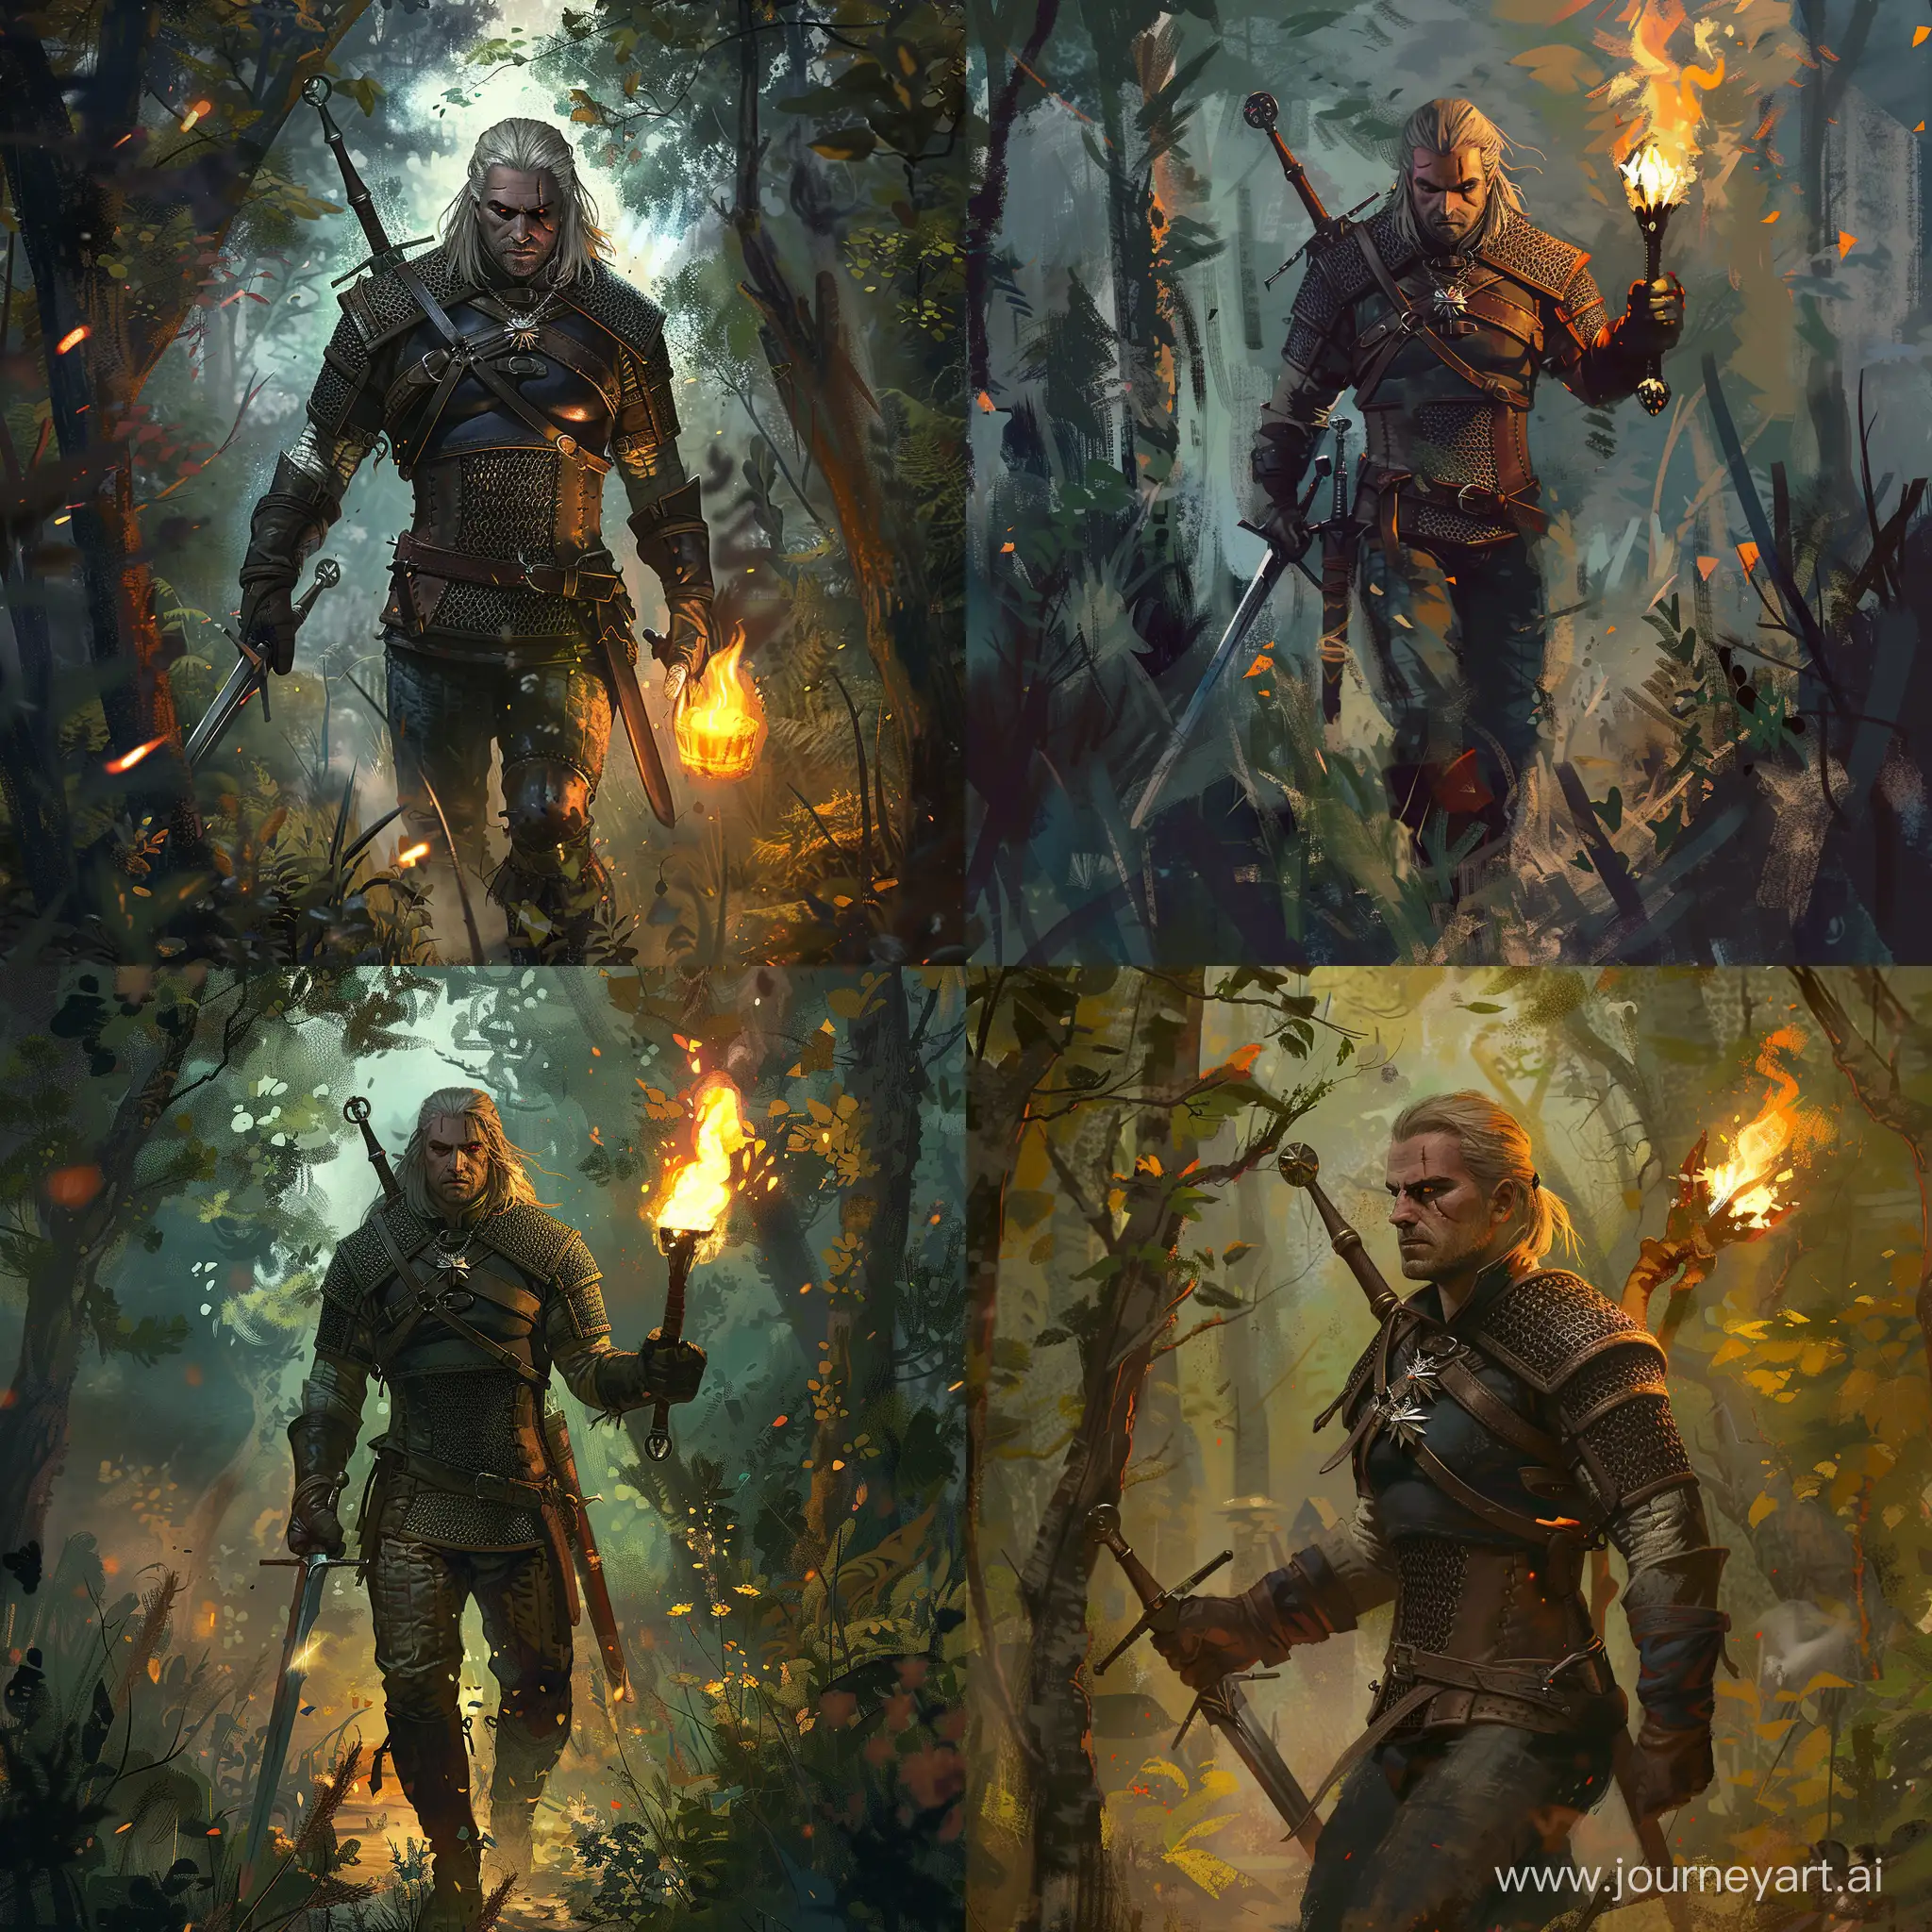 A witcher with a calm face, holding a sword and a torch, walks through the forest